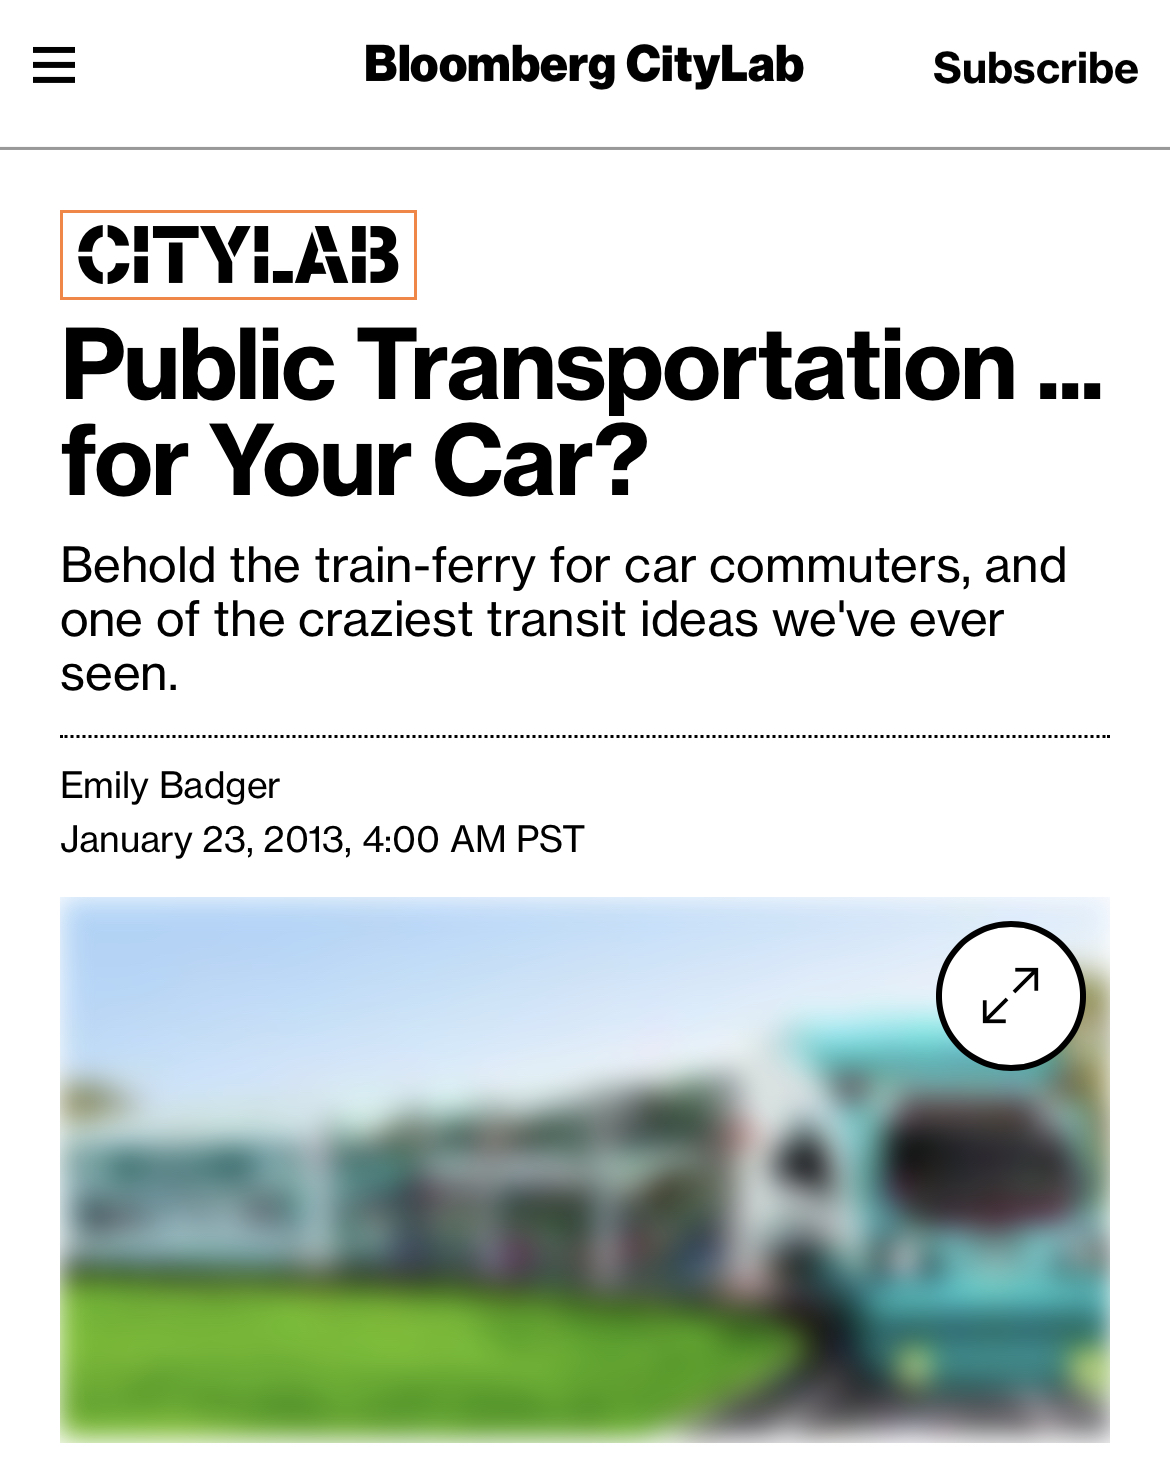 Please Read The Bloomberg Article About the Rapid Commute System, “Public Transportation … for Your Car